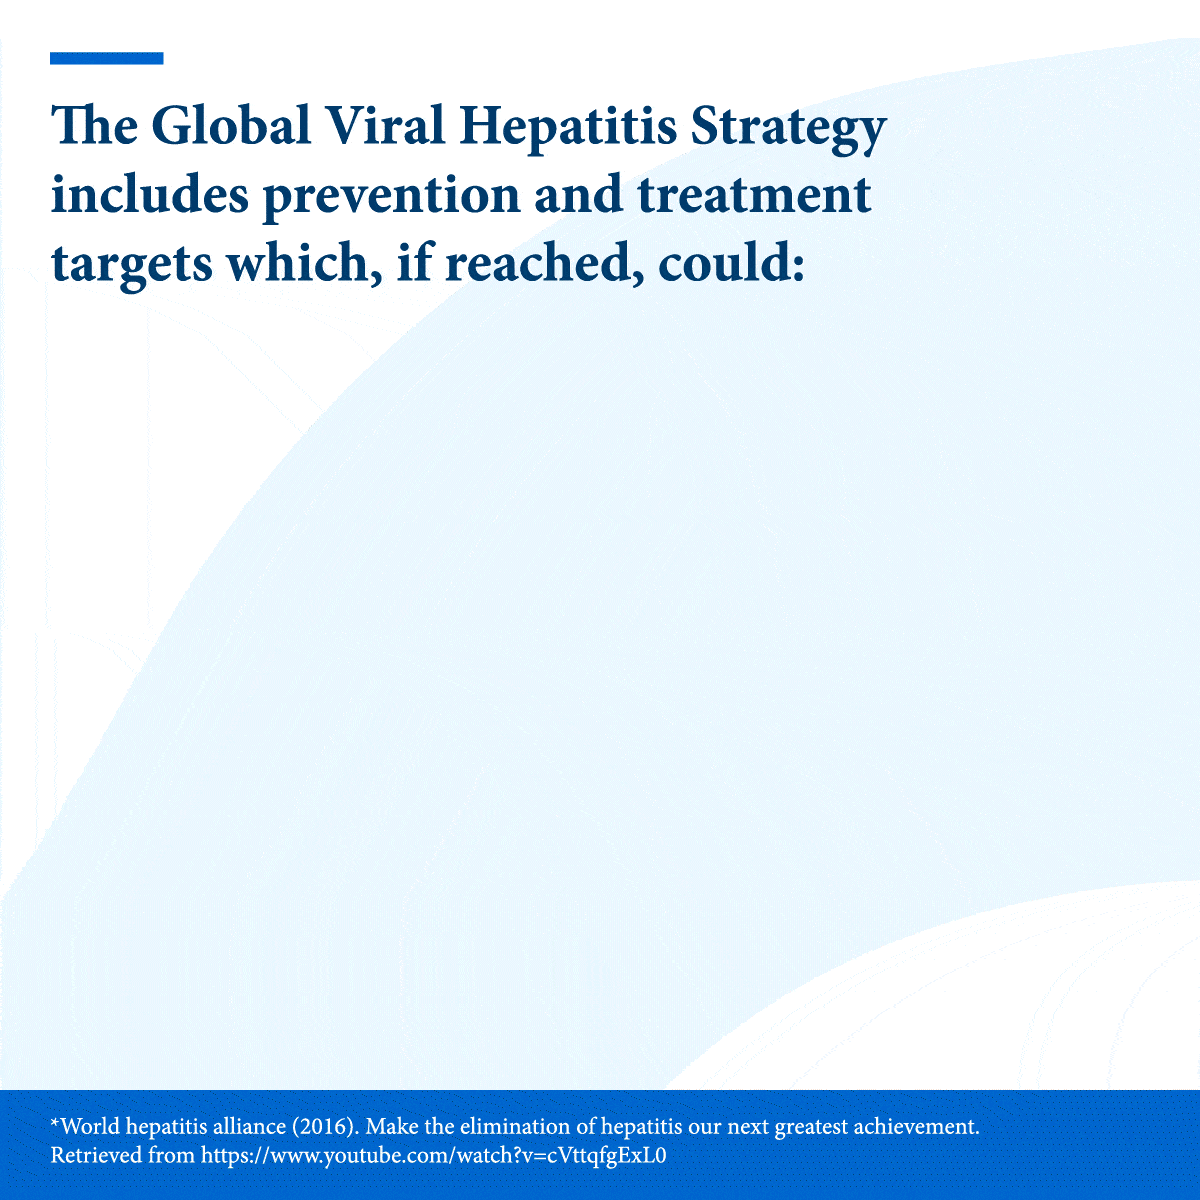 A graphic showing the effect of strong hepatitis screening